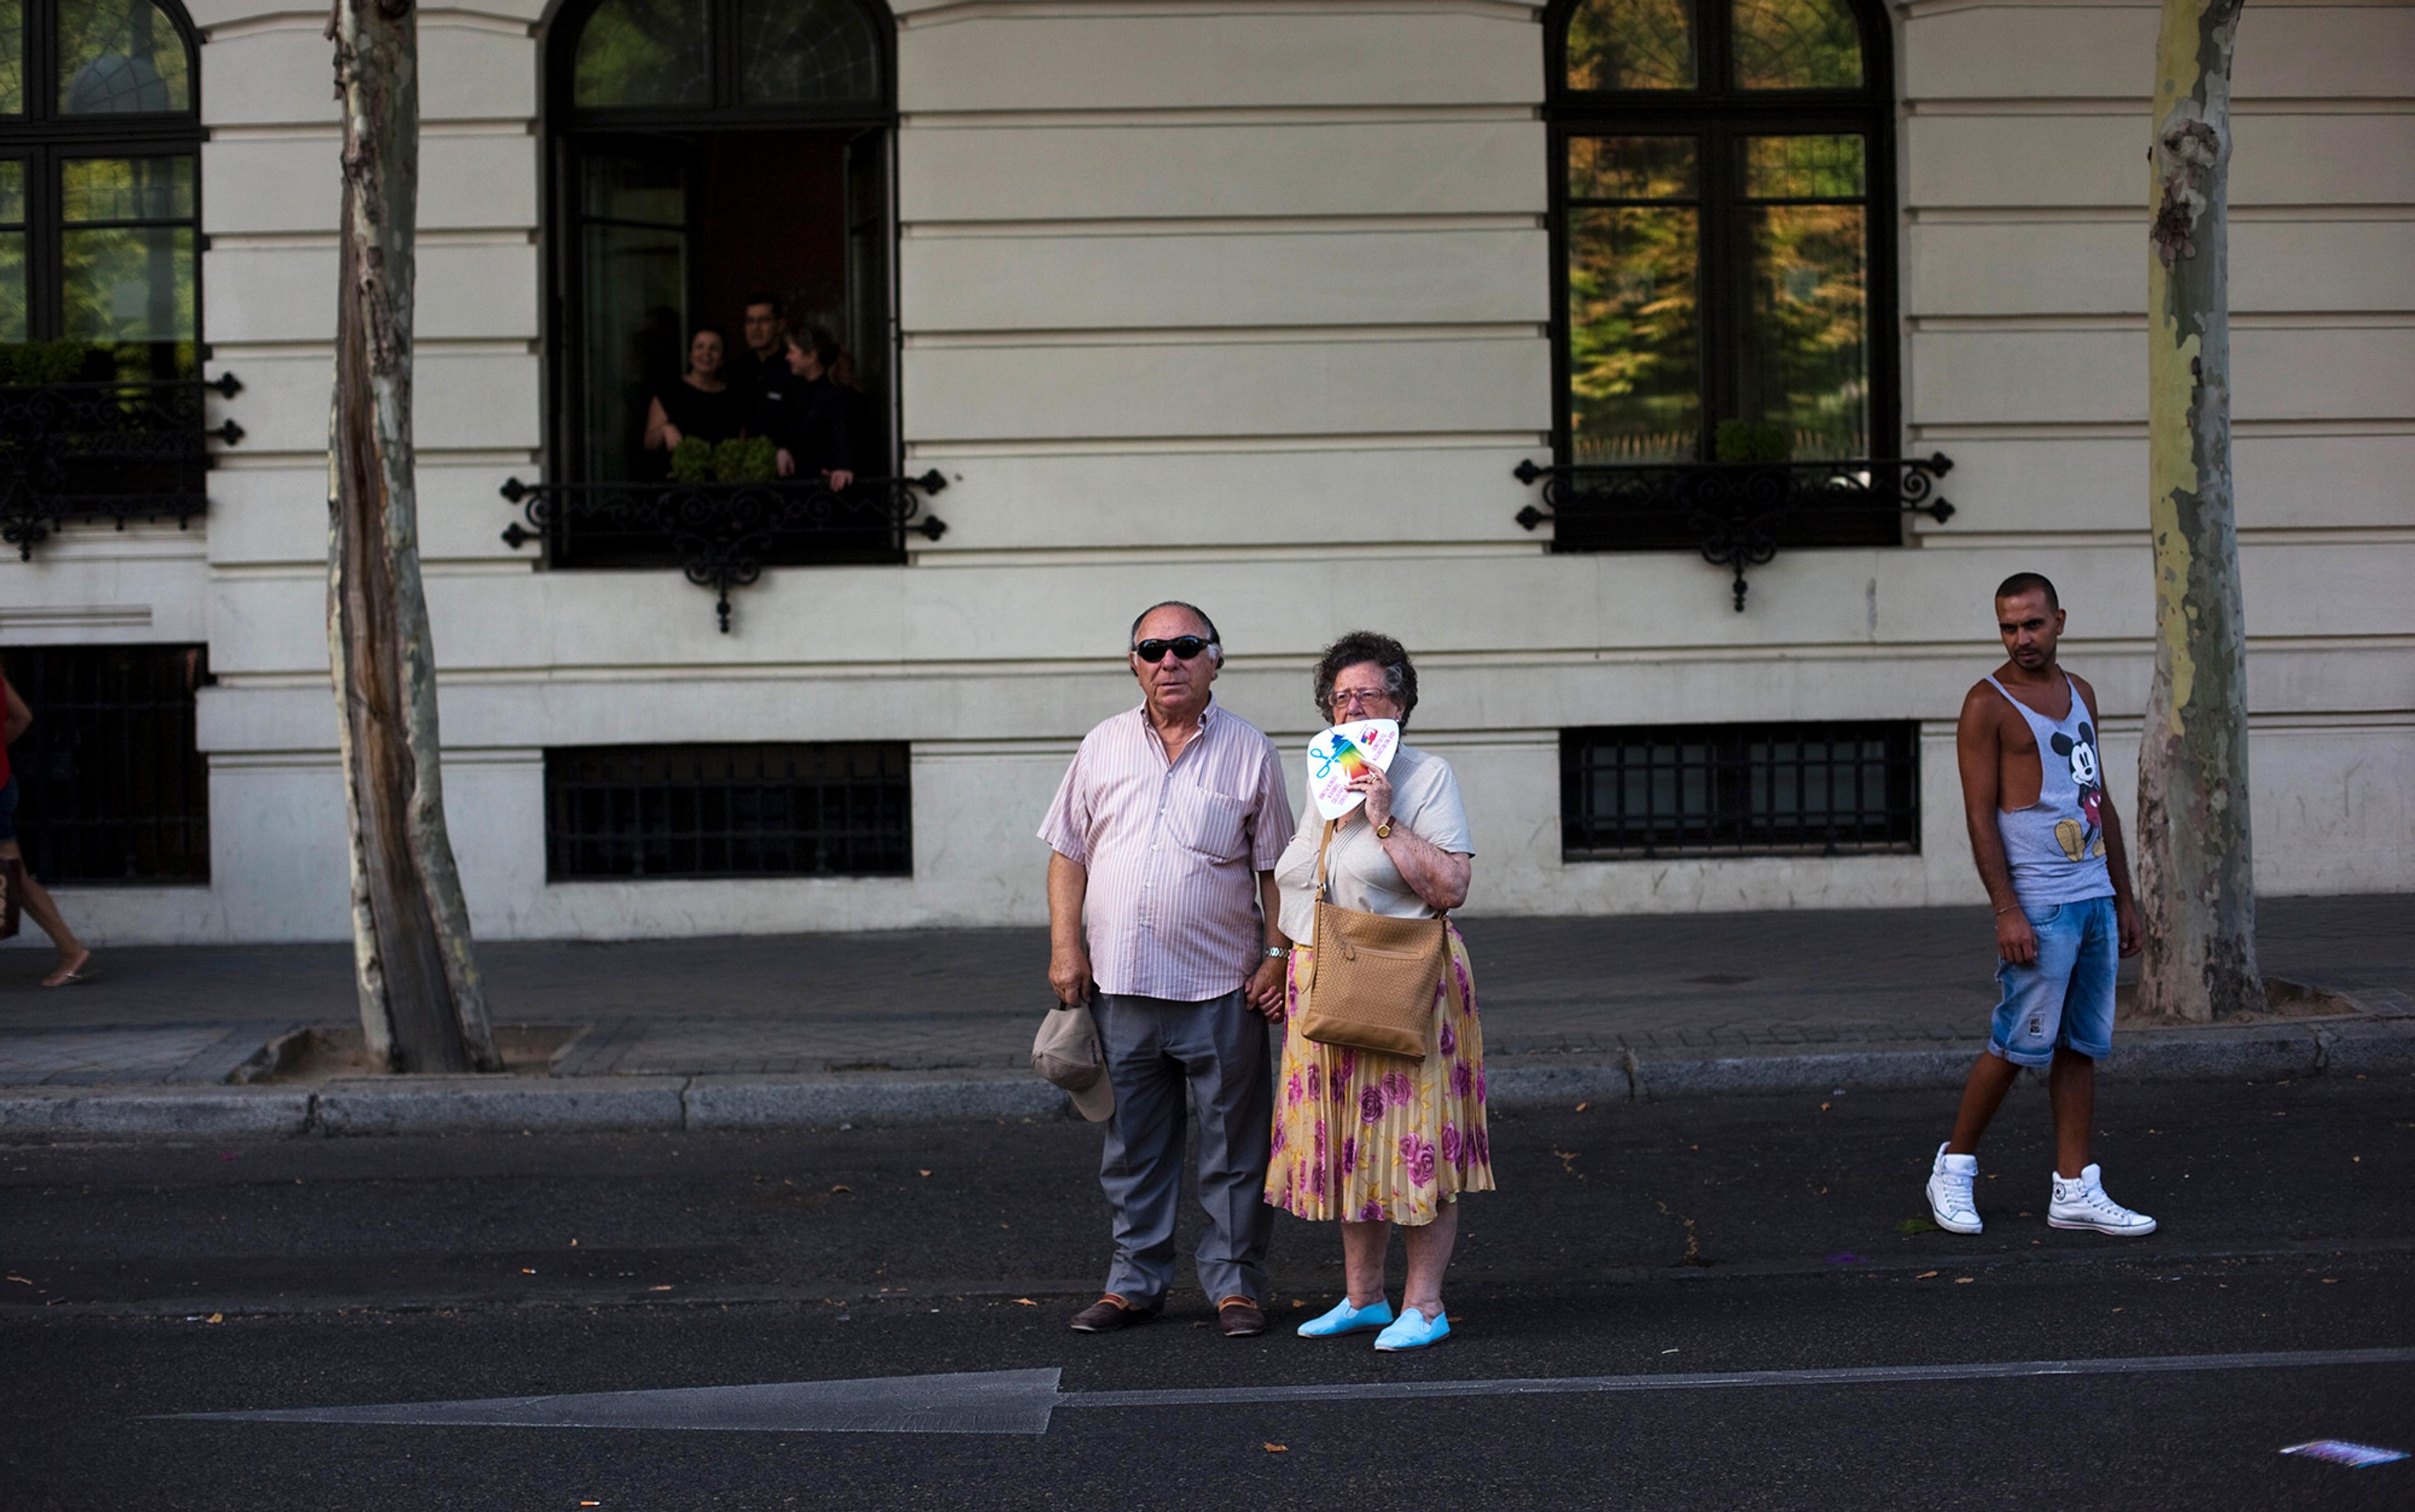 Elderly couple holding hands while standing in the street. The woman holds a colourful fan partially covering her face. A man in casual attire walks by on the right. Two trees and a white building with large windows are in the background, with three people looking out of one of the windows.